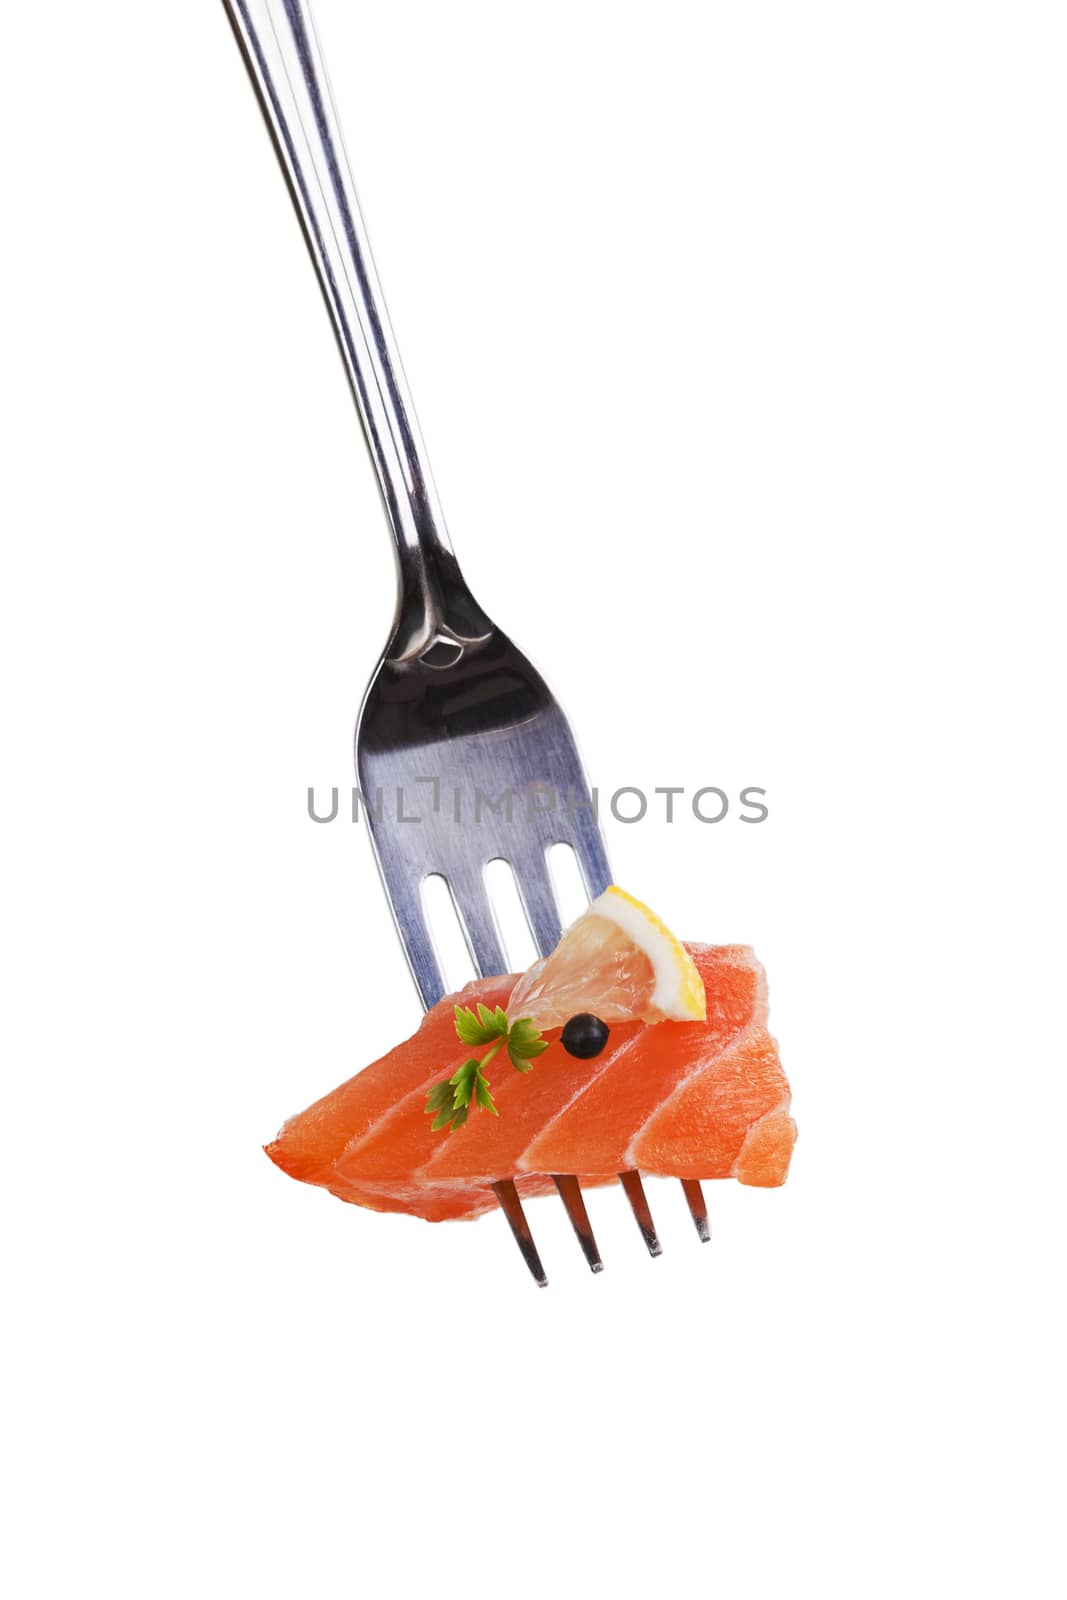 Delicious salmon piece on fork. by eskymaks